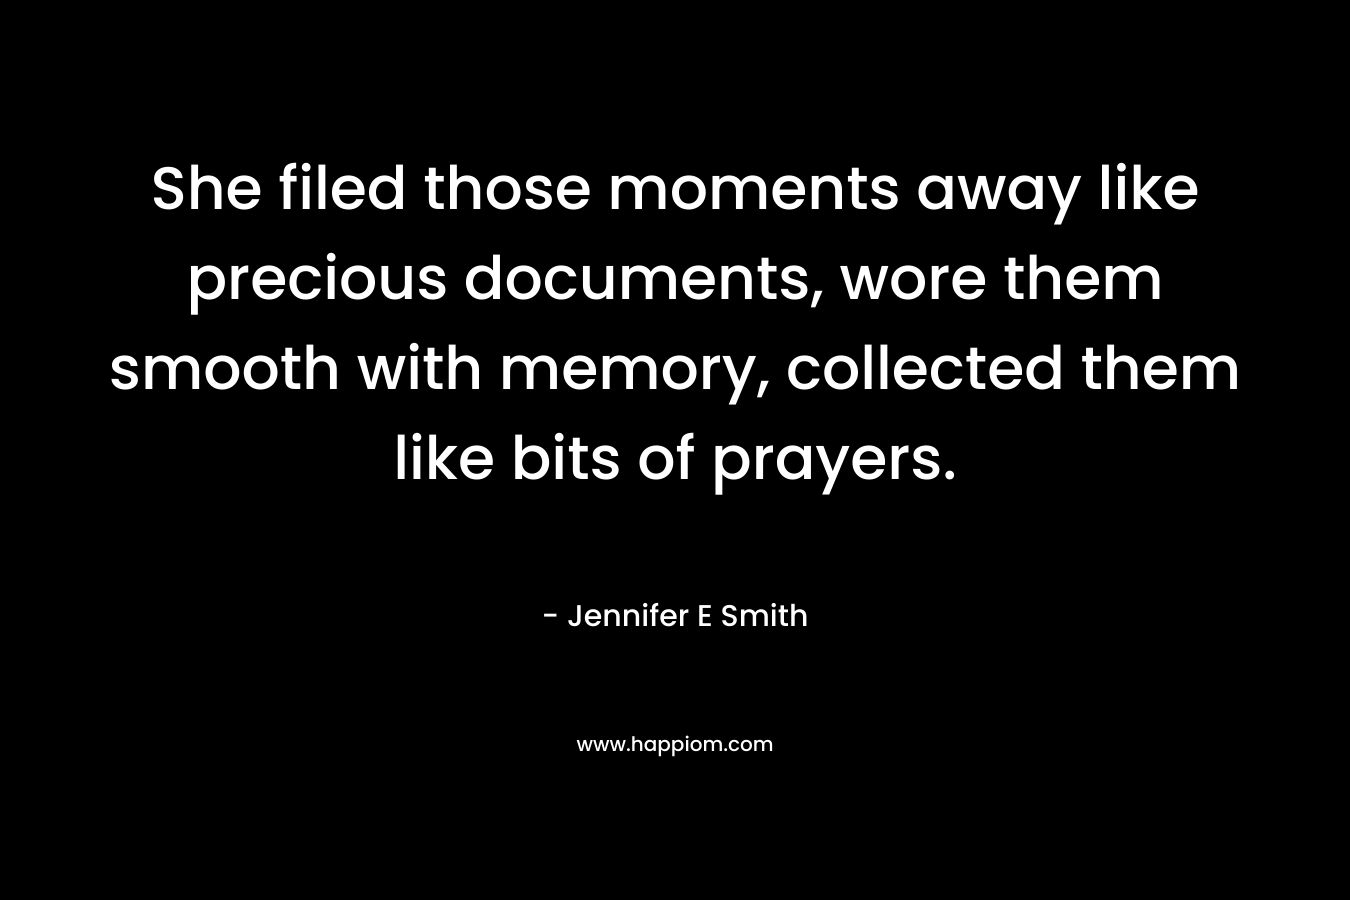 She filed those moments away like precious documents, wore them smooth with memory, collected them like bits of prayers. – Jennifer E Smith